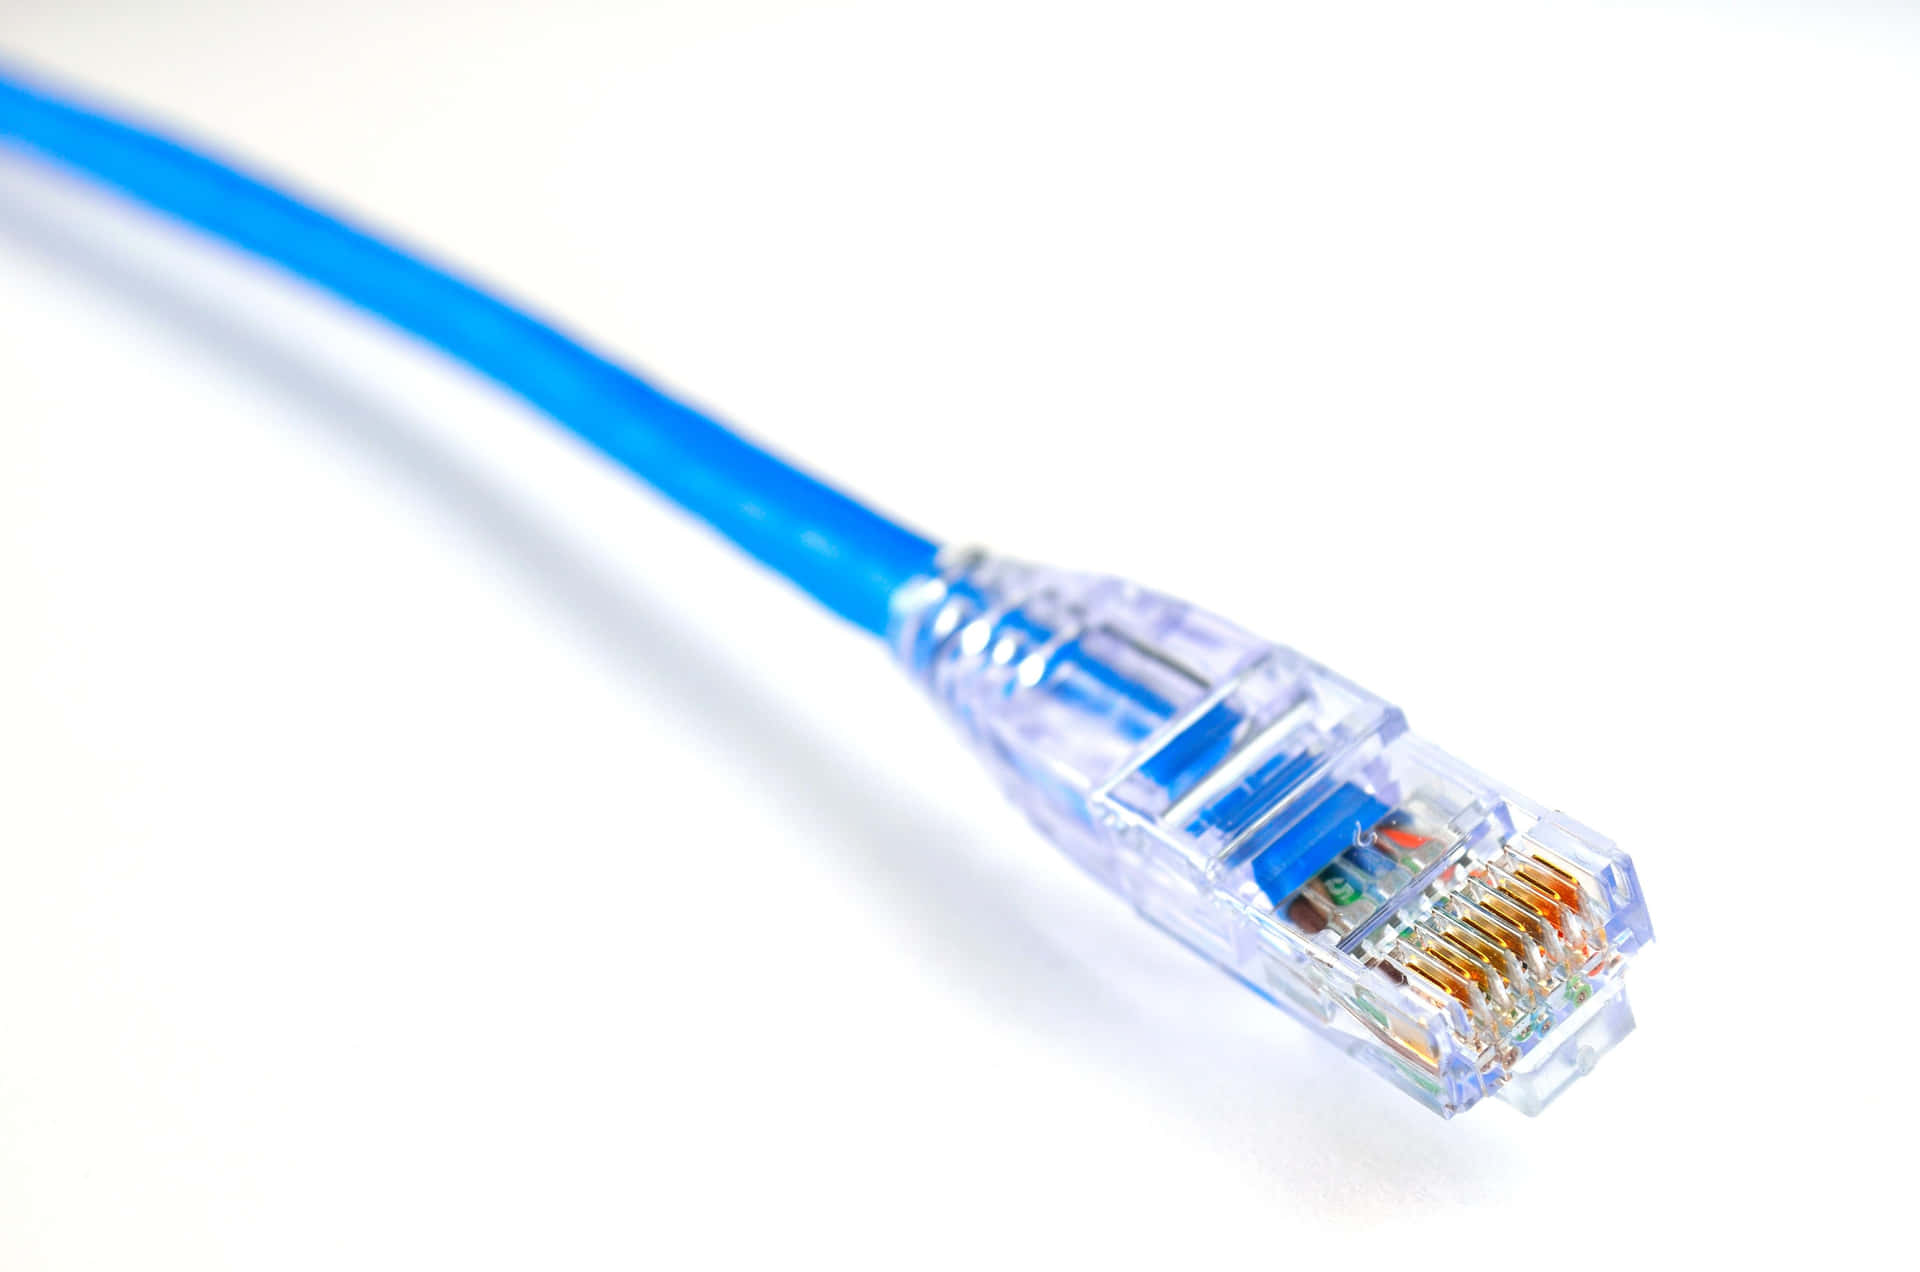 Get connected with fast and reliable Ethernet connections! Wallpaper